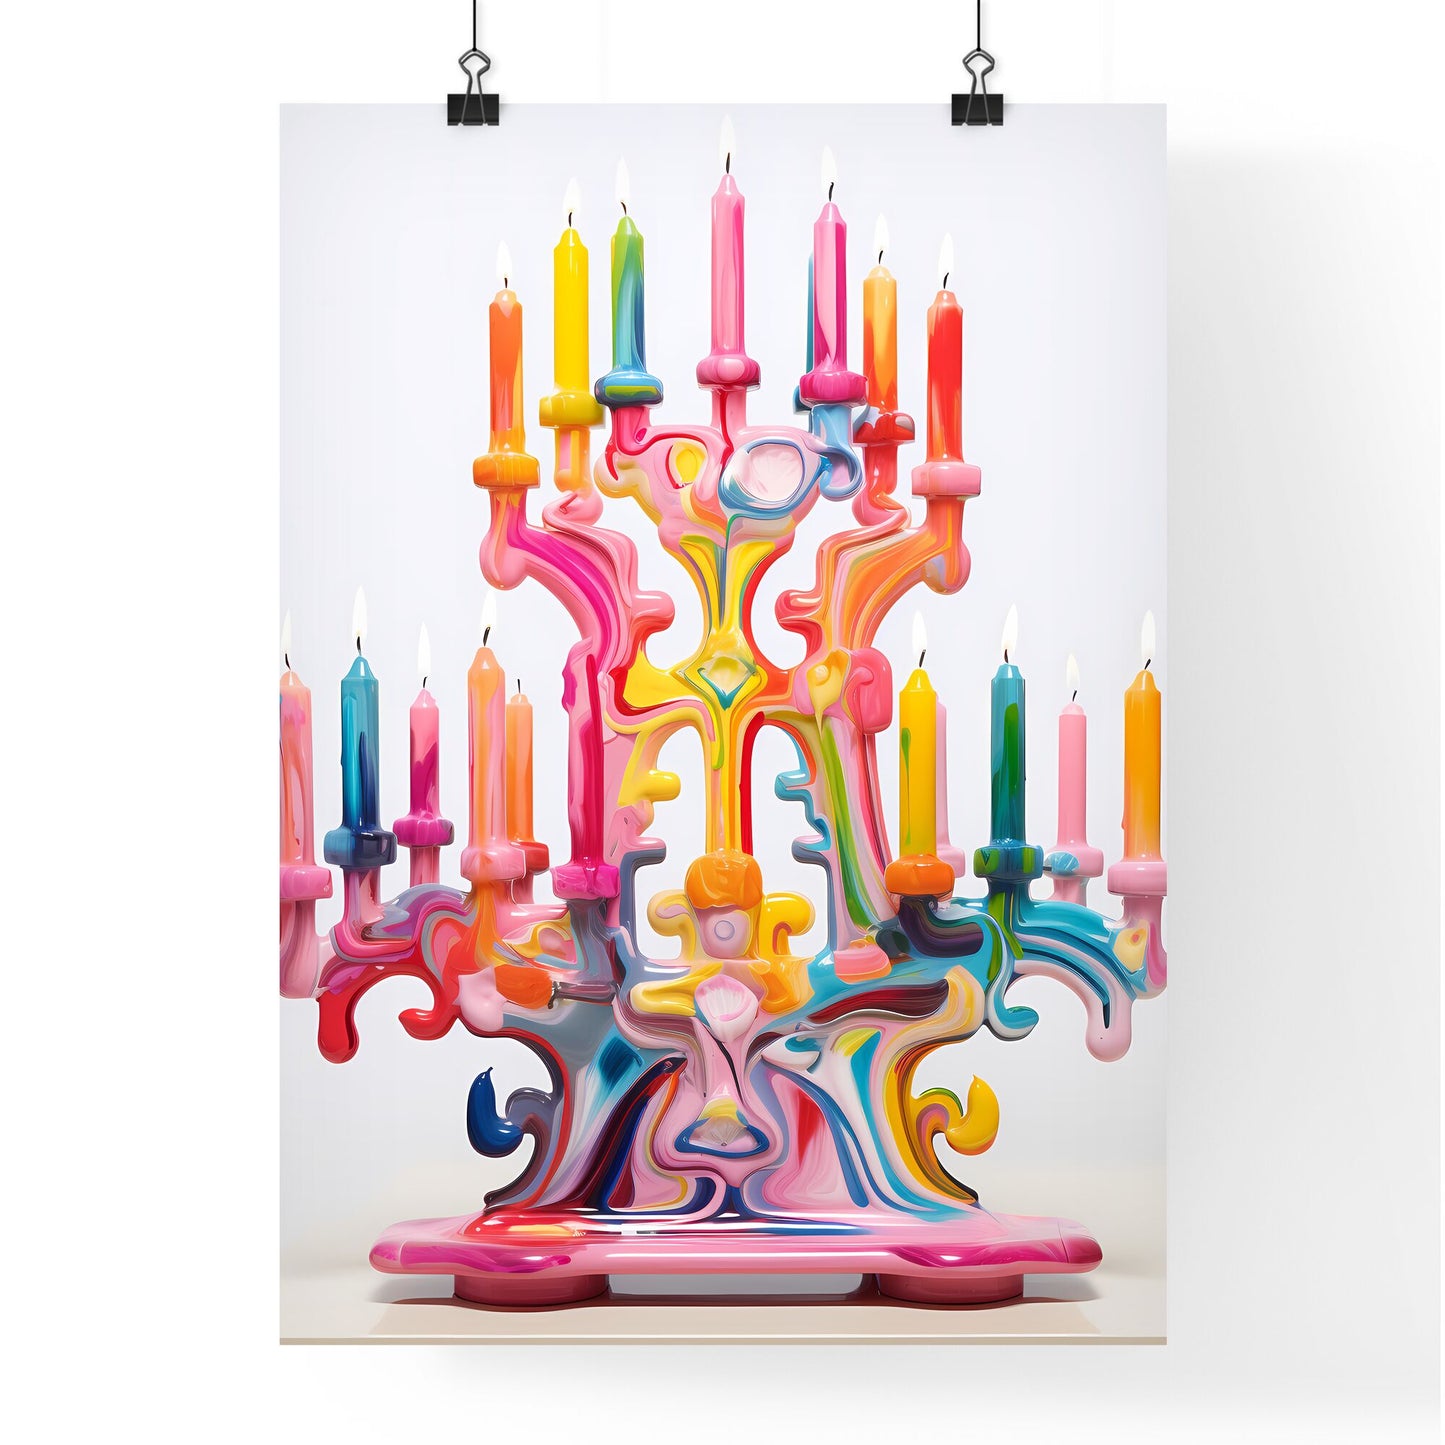 A Poster of a colorful menorah painted on white - A Colorful Candle Holder With Lit Candles Default Title